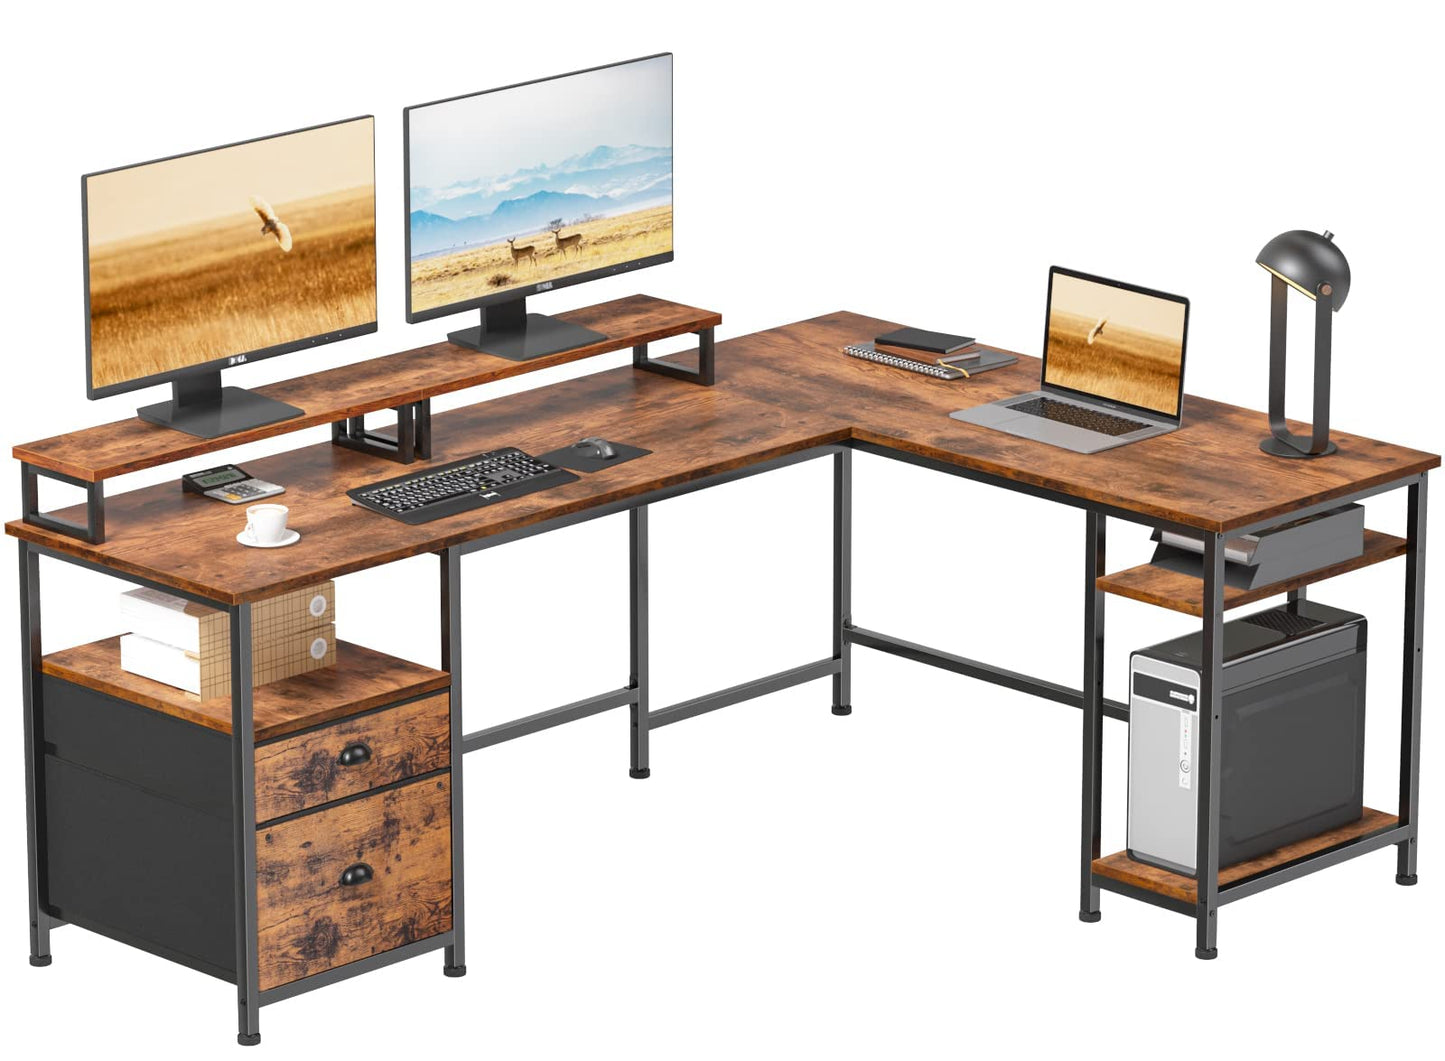 Furologee 66" L Shaped Computer Desk with Shelves, Reversible Corner Gaming Desk with File Drawer and Dual Monitor Stand, Large Home Office Desk